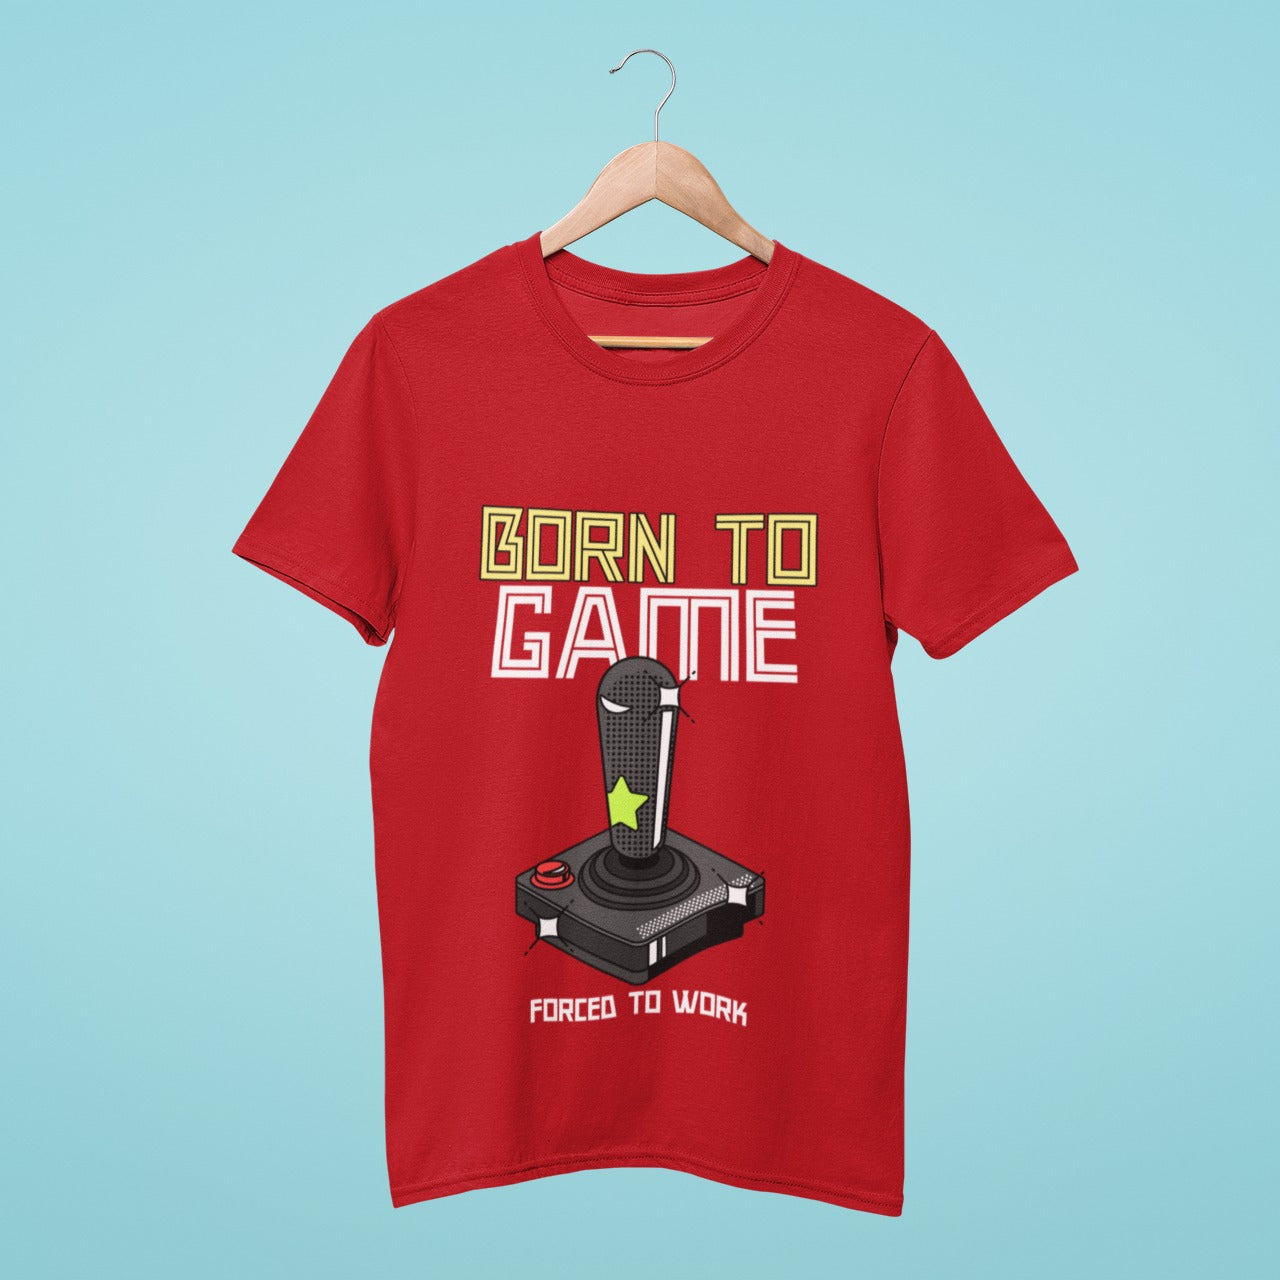 Get ready to level up your style with this Born to Game t-shirt! Featuring a bold graphic of a gaming console, this red tee lets everyone know where your true passions lie. With "Forced to Work" written in small below the console, this shirt is perfect for any dedicated gamer.